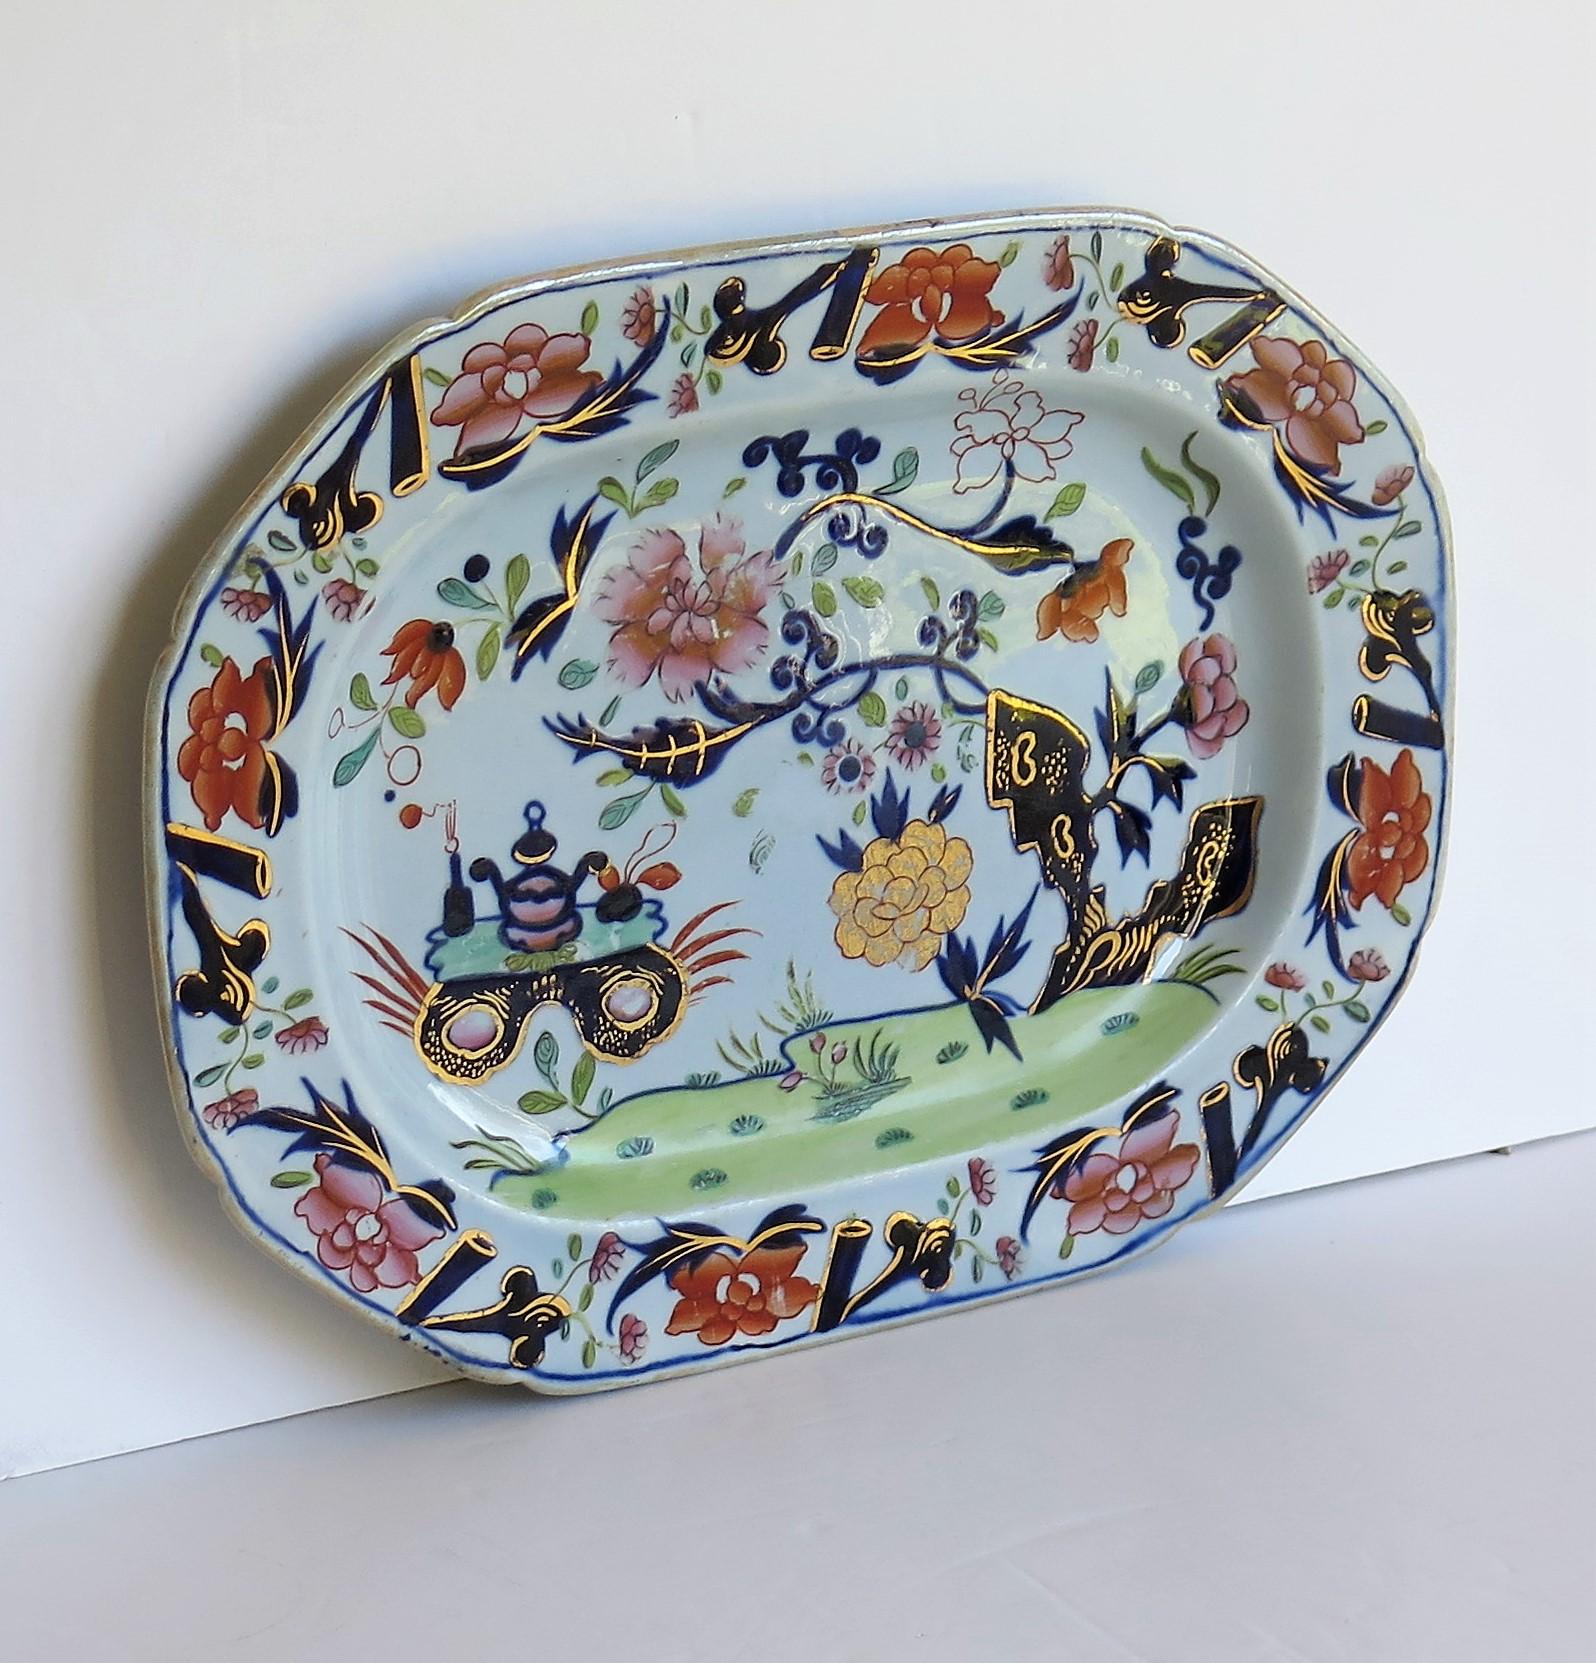 This a fairly large, very early 19th century platter of 12.5 inch width made by Mason's Ironstone in the small vase, flower and rock pattern, circa 1815.

Very early 19th century Mason's Ironstone platters are rare and this is a fine heavy example